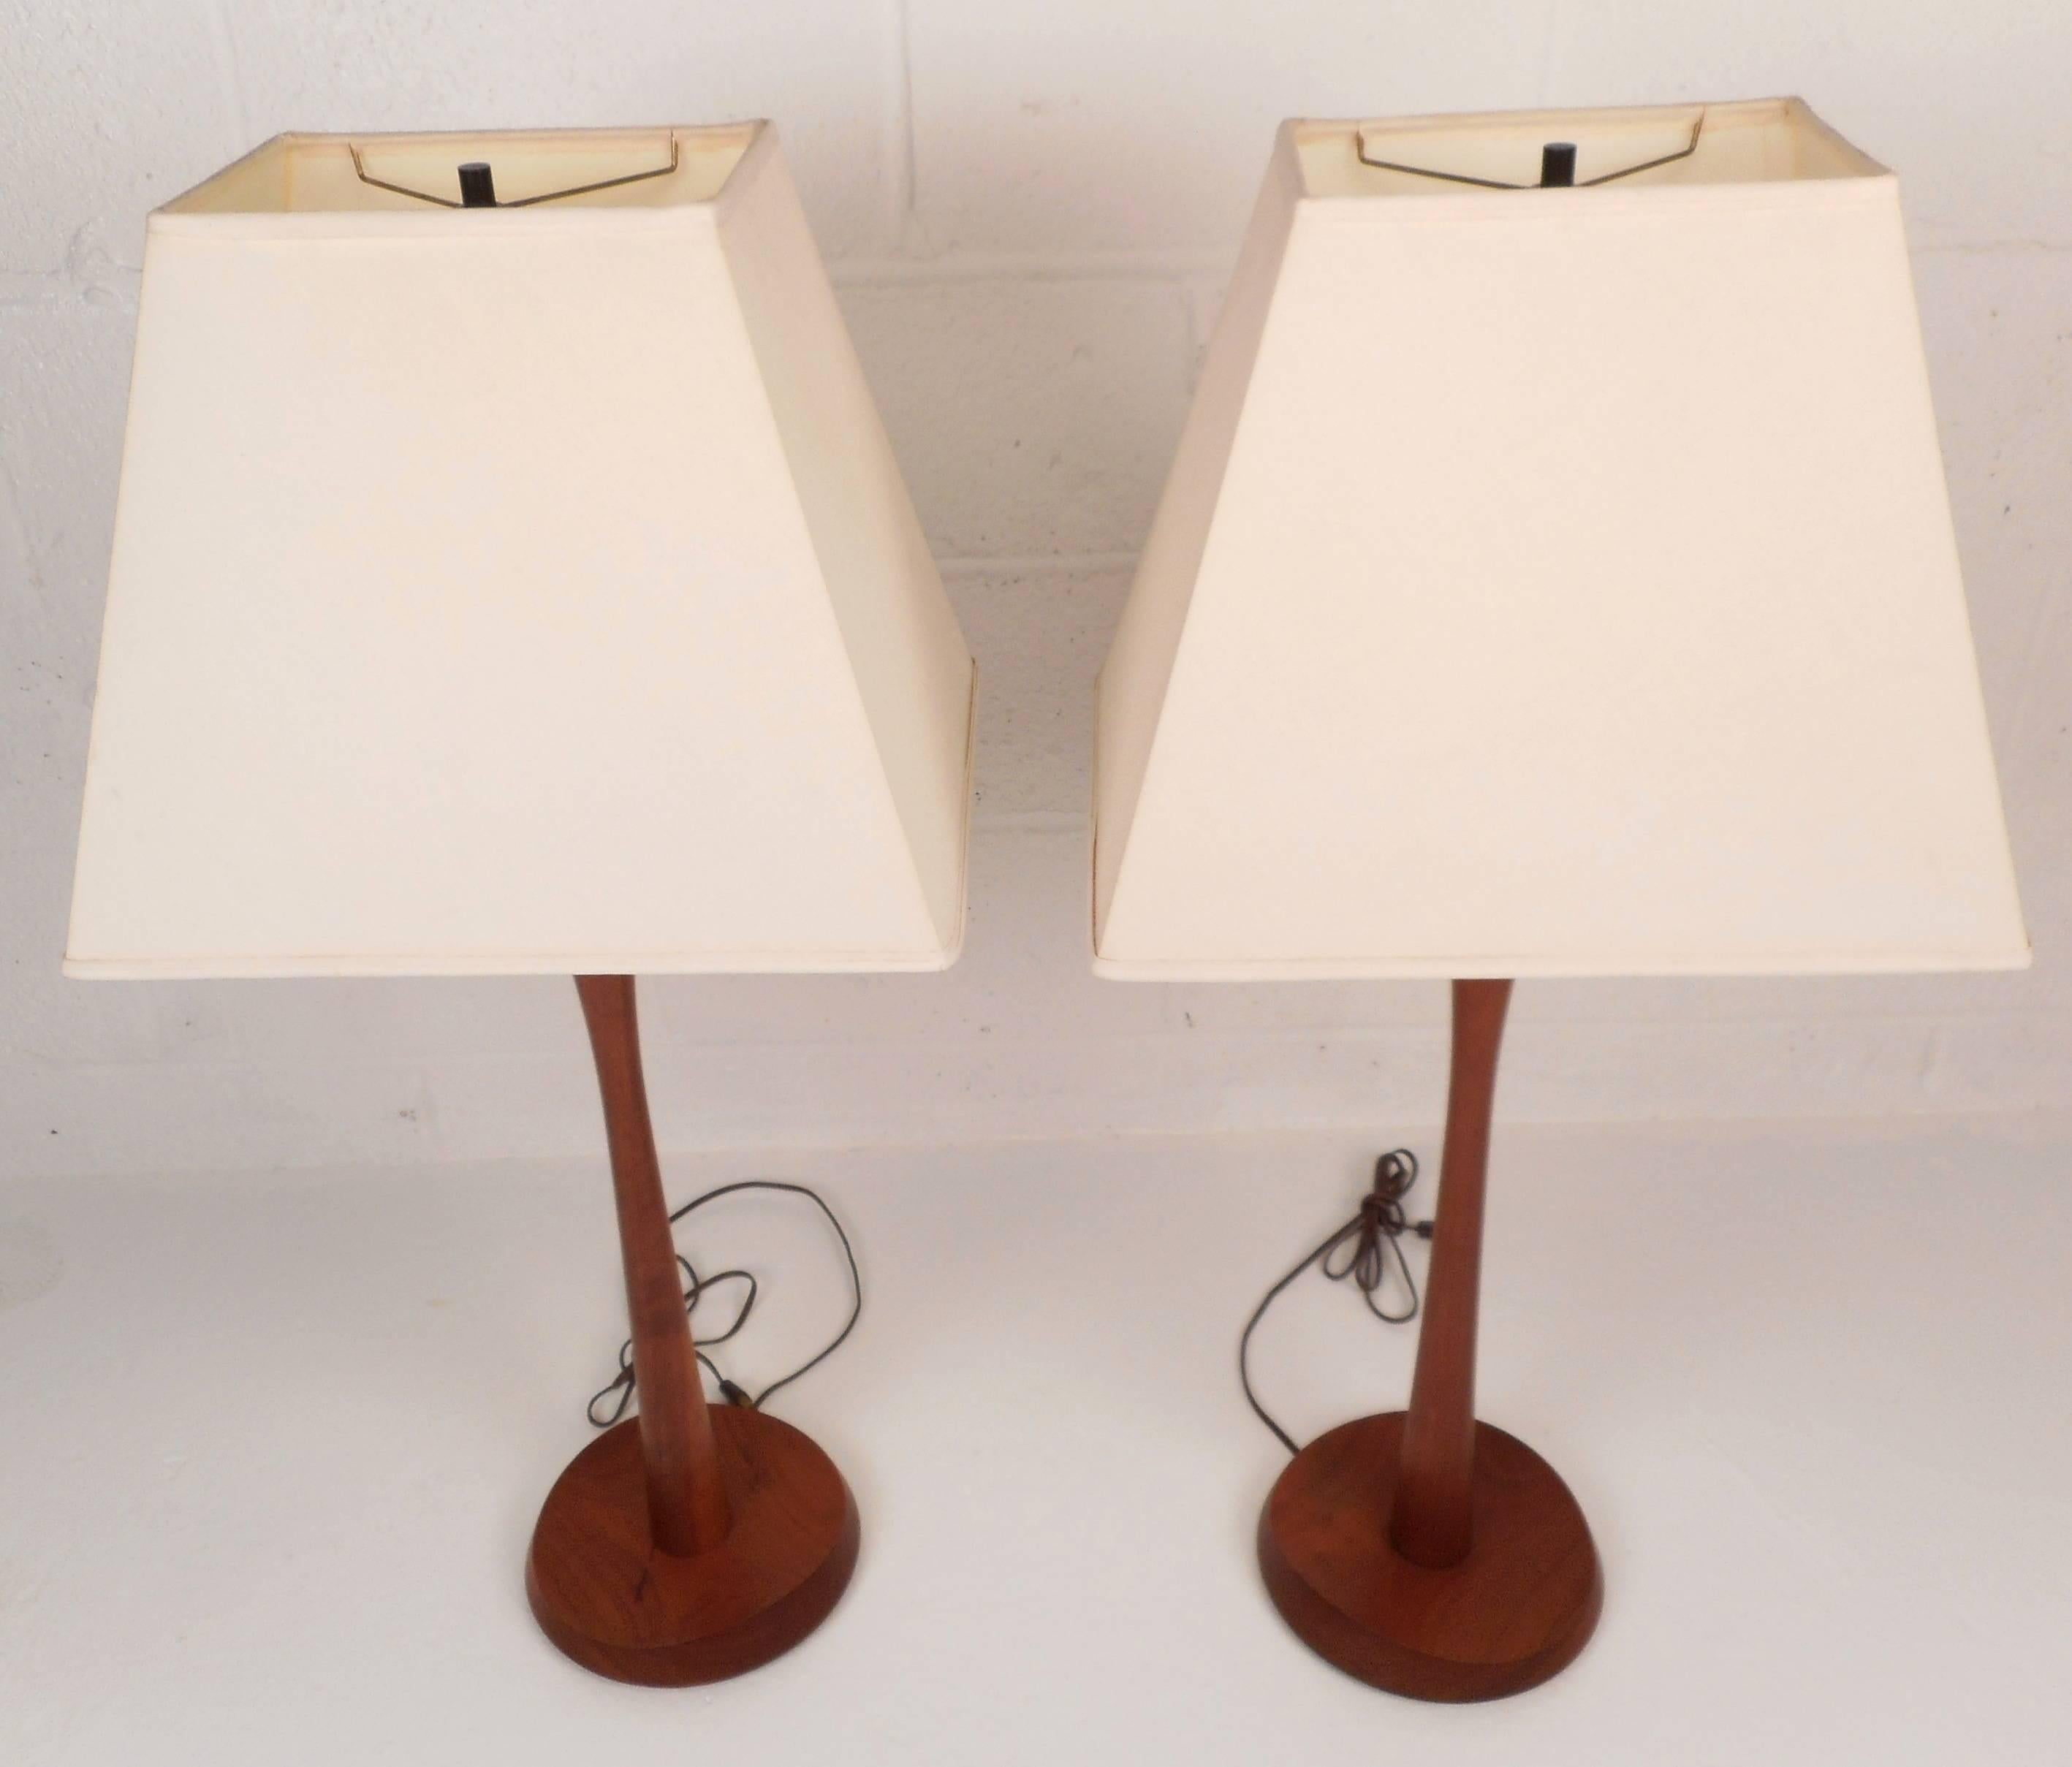 Elegant pair of vintage modern lamps feature unique sculpted bases complimented by bright white shades. They are made of solid teak and are sure to add mid-century style to any interior. Please confirm item location (NY or NJ).